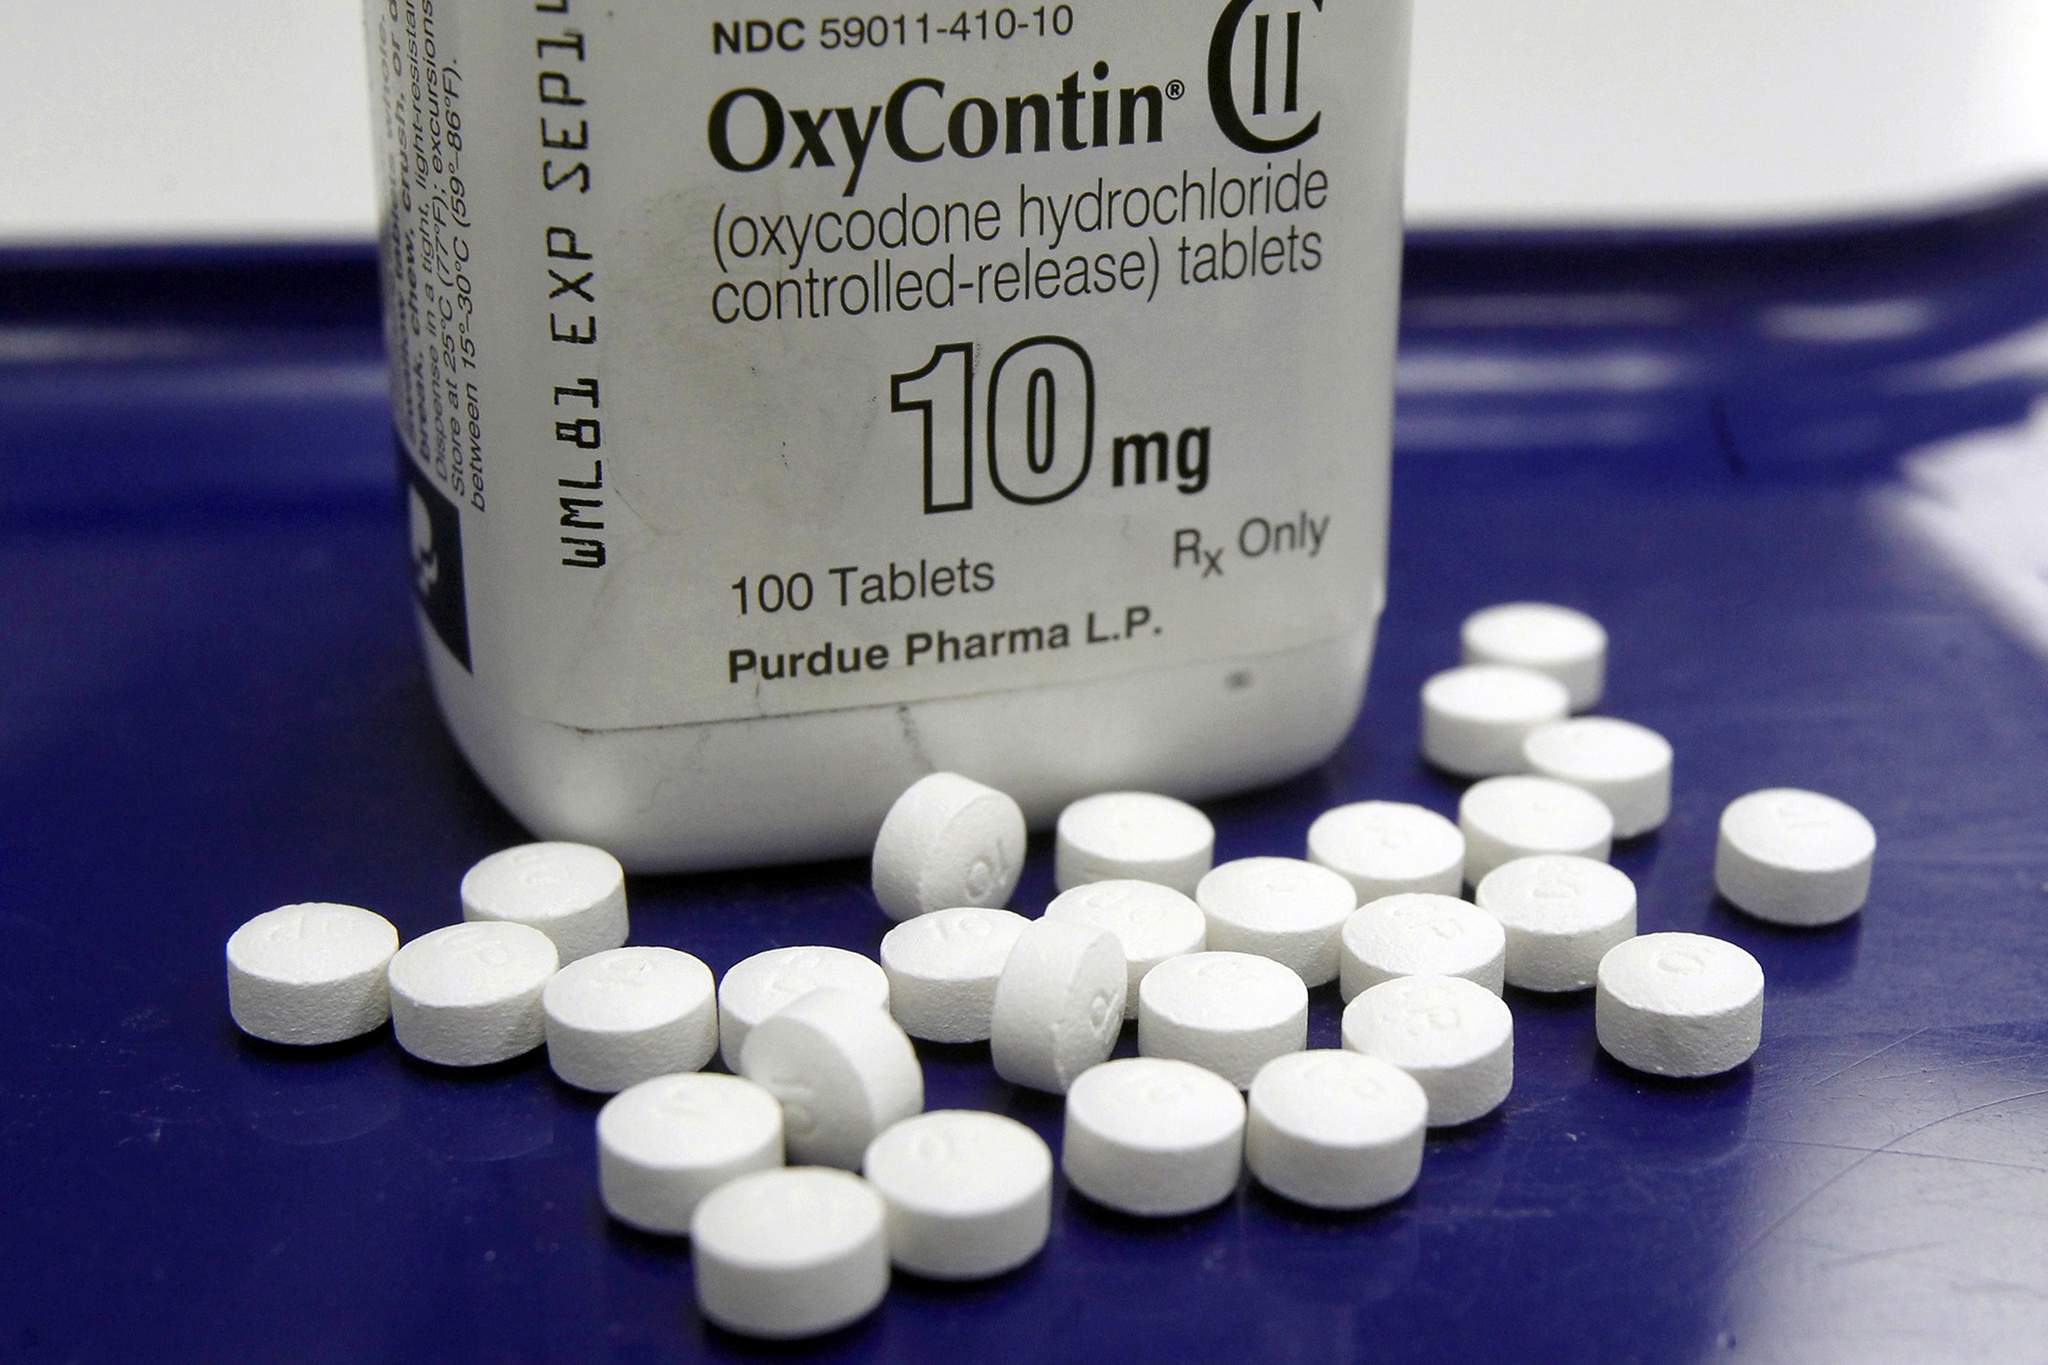 Nevada announces $45M settlement with McKinsey over opioids